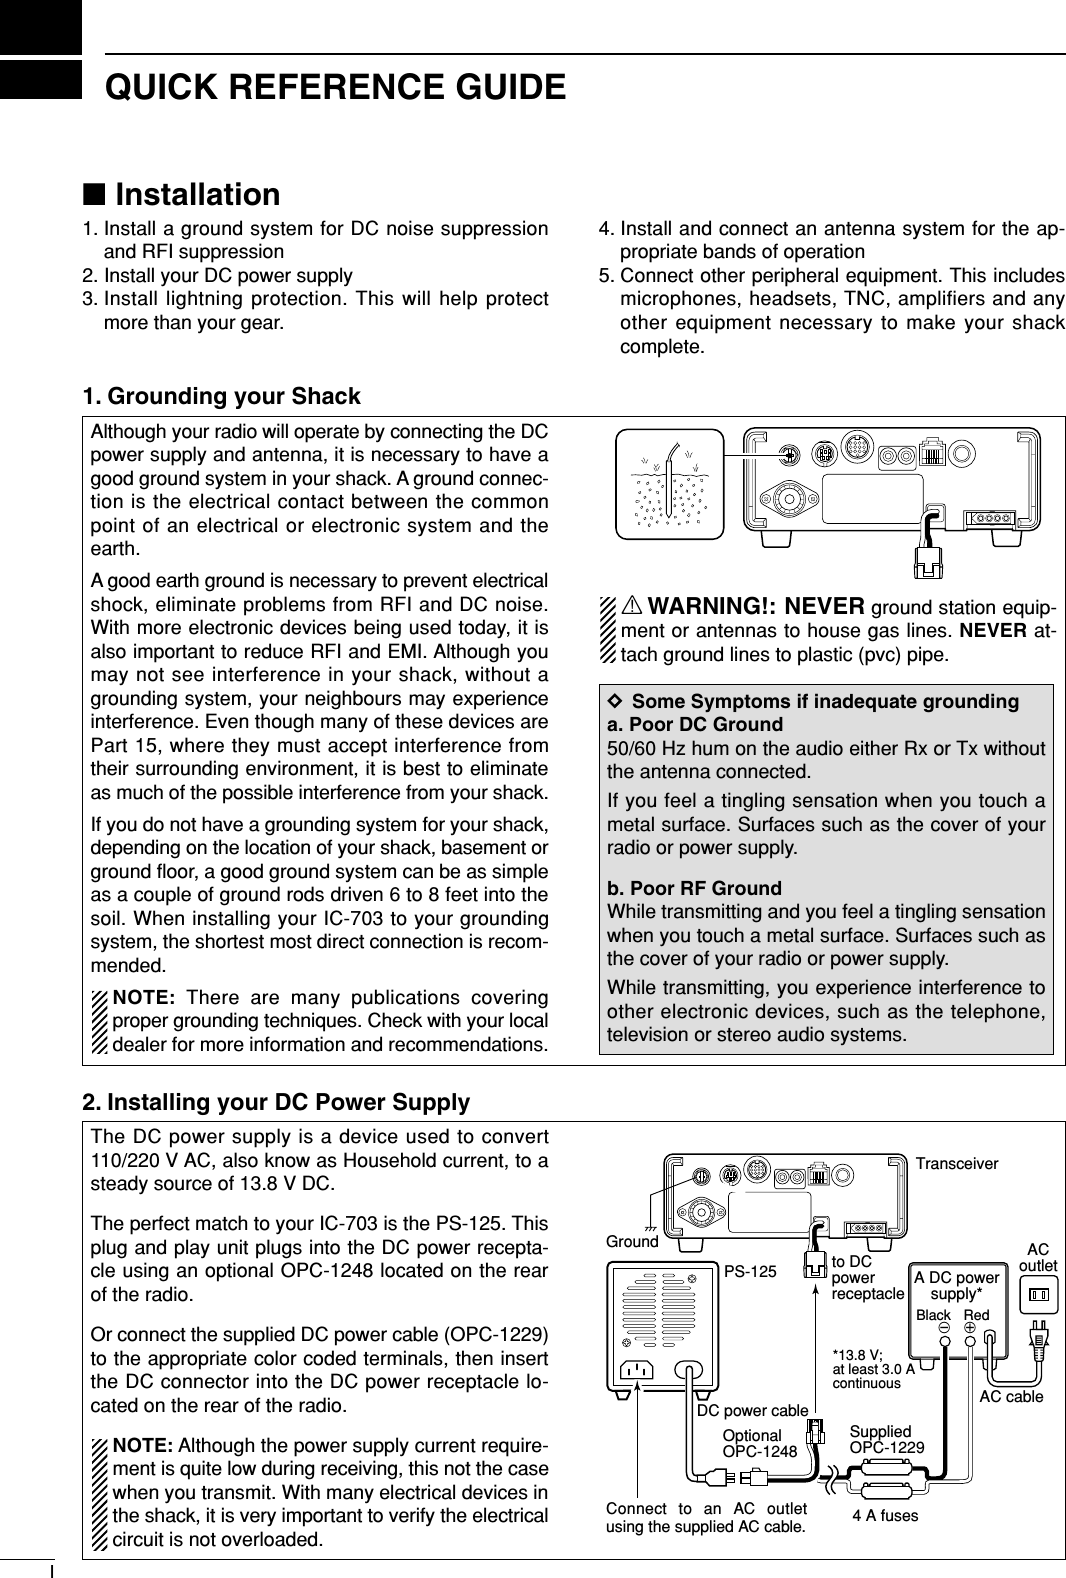 IQUICK REFERENCE GUIDE■Installation1. Install a ground system for DC noise suppressionand RFI suppression2. Install your DC power supply3. Install lightning protection. This will help protectmore than your gear.4. Install and connect an antenna system for the ap-propriate bands of operation5. Connect other peripheral equipment. This includesmicrophones, headsets, TNC, amplifiers and anyother equipment necessary to make your shackcomplete.Although your radio will operate by connecting the DCpower supply and antenna, it is necessary to have agood ground system in your shack. A ground connec-tion is the electrical contact between the commonpoint of an electrical or electronic system and theearth.A good earth ground is necessary to prevent electricalshock, eliminate problems from RFI and DC noise.With more electronic devices being used today, it isalso important to reduce RFI and EMI. Although youmay not see interference in your shack, without agrounding system, your neighbours may experienceinterference. Even though many of these devices arePart 15, where they must accept interference fromtheir surrounding environment, it is best to eliminateas much of the possible interference from your shack. If you do not have a grounding system for your shack,depending on the location of your shack, basement orground ﬂoor, a good ground system can be as simpleas a couple of ground rods driven 6 to 8 feet into thesoil. When installing your IC-703 to your groundingsystem, the shortest most direct connection is recom-mended.NOTE: There are many publications coveringproper grounding techniques. Check with your localdealer for more information and recommendations.RWARNING!: NEVER ground station equip-ment or antennas to house gas lines. NEVER at-tach ground lines to plastic (pvc) pipe.DSome Symptoms if inadequate groundinga. Poor DC Ground50/60 Hz hum on the audio either Rx or Tx withoutthe antenna connected.If you feel a tingling sensation when you touch ametal surface. Surfaces such as the cover of yourradio or power supply.b. Poor RF GroundWhile transmitting and you feel a tingling sensationwhen you touch a metal surface. Surfaces such asthe cover of your radio or power supply.While transmitting, you experience interference toother electronic devices, such as the telephone,television or stereo audio systems. The DC power supply is a device used to convert110/220 V AC, also know as Household current, to asteady source of 13.8 V DC. The perfect match to your IC-703 is the PS-125. Thisplug and play unit plugs into the DC power recepta-cle using an optional OPC-1248 located on the rearof the radio.Or connect the supplied DC power cable (OPC-1229)to the appropriate color coded terminals, then insertthe DC connector into the DC power receptacle lo-cated on the rear of the radio.NOTE: Although the power supply current require-ment is quite low during receiving, this not the casewhen you transmit. With many electrical devices inthe shack, it is very important to verify the electricalcircuit is not overloaded.1. Grounding your Shack2. Installing your DC Power SupplyAC cableACoutletA DC powersupply*Black _ Red+PS-125DC power cableGround4 A fusesTransceiverto DC powerreceptacleSuppliedOPC-1229OptionalOPC-1248Connect to an AC outlet using the supplied AC cable.*13.8 V; at least 3.0 Acontinuous